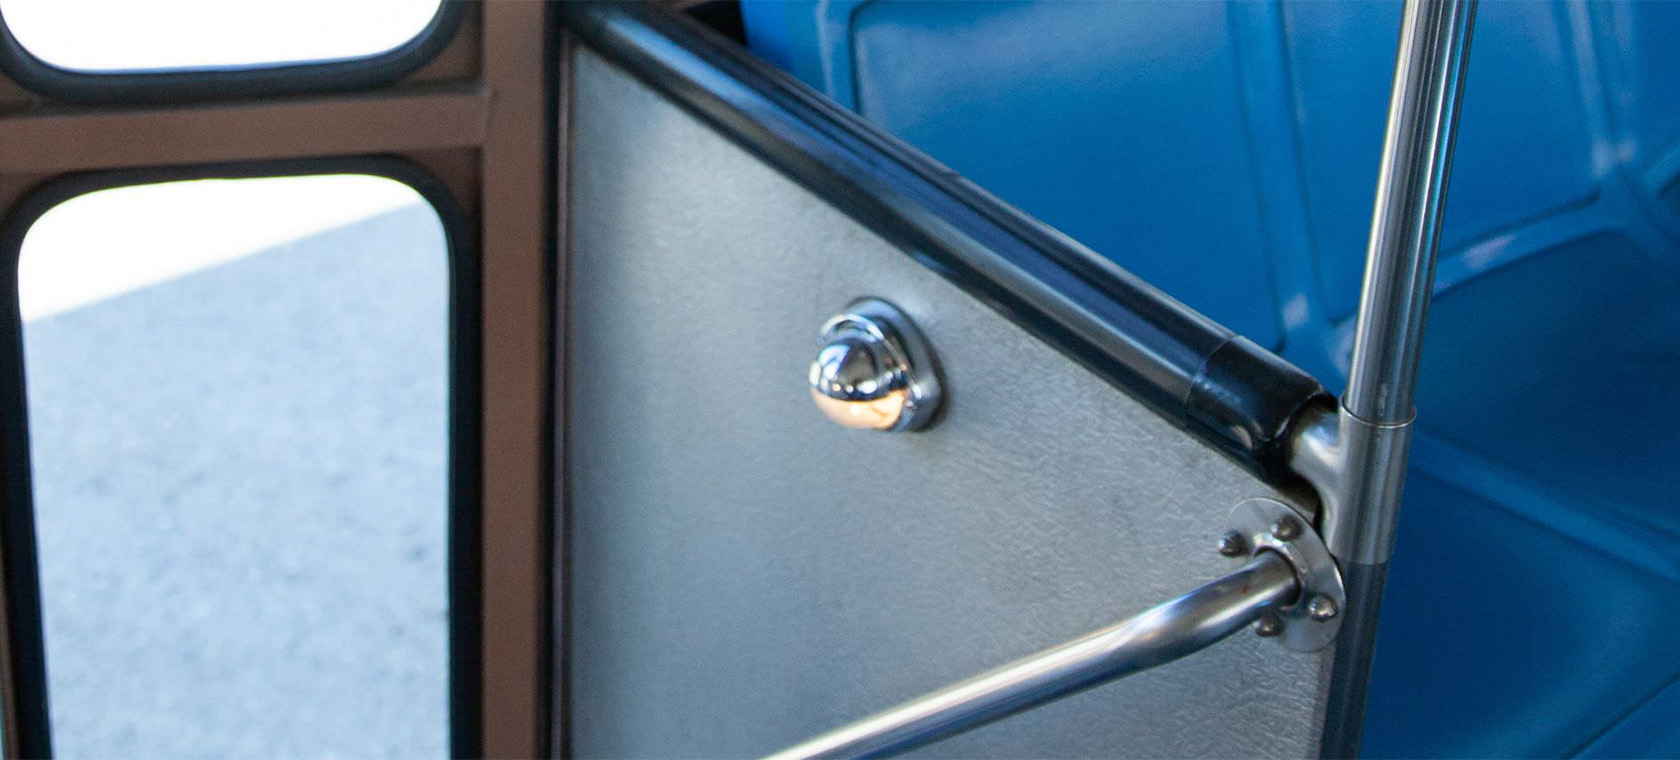 close up of bus bench and door